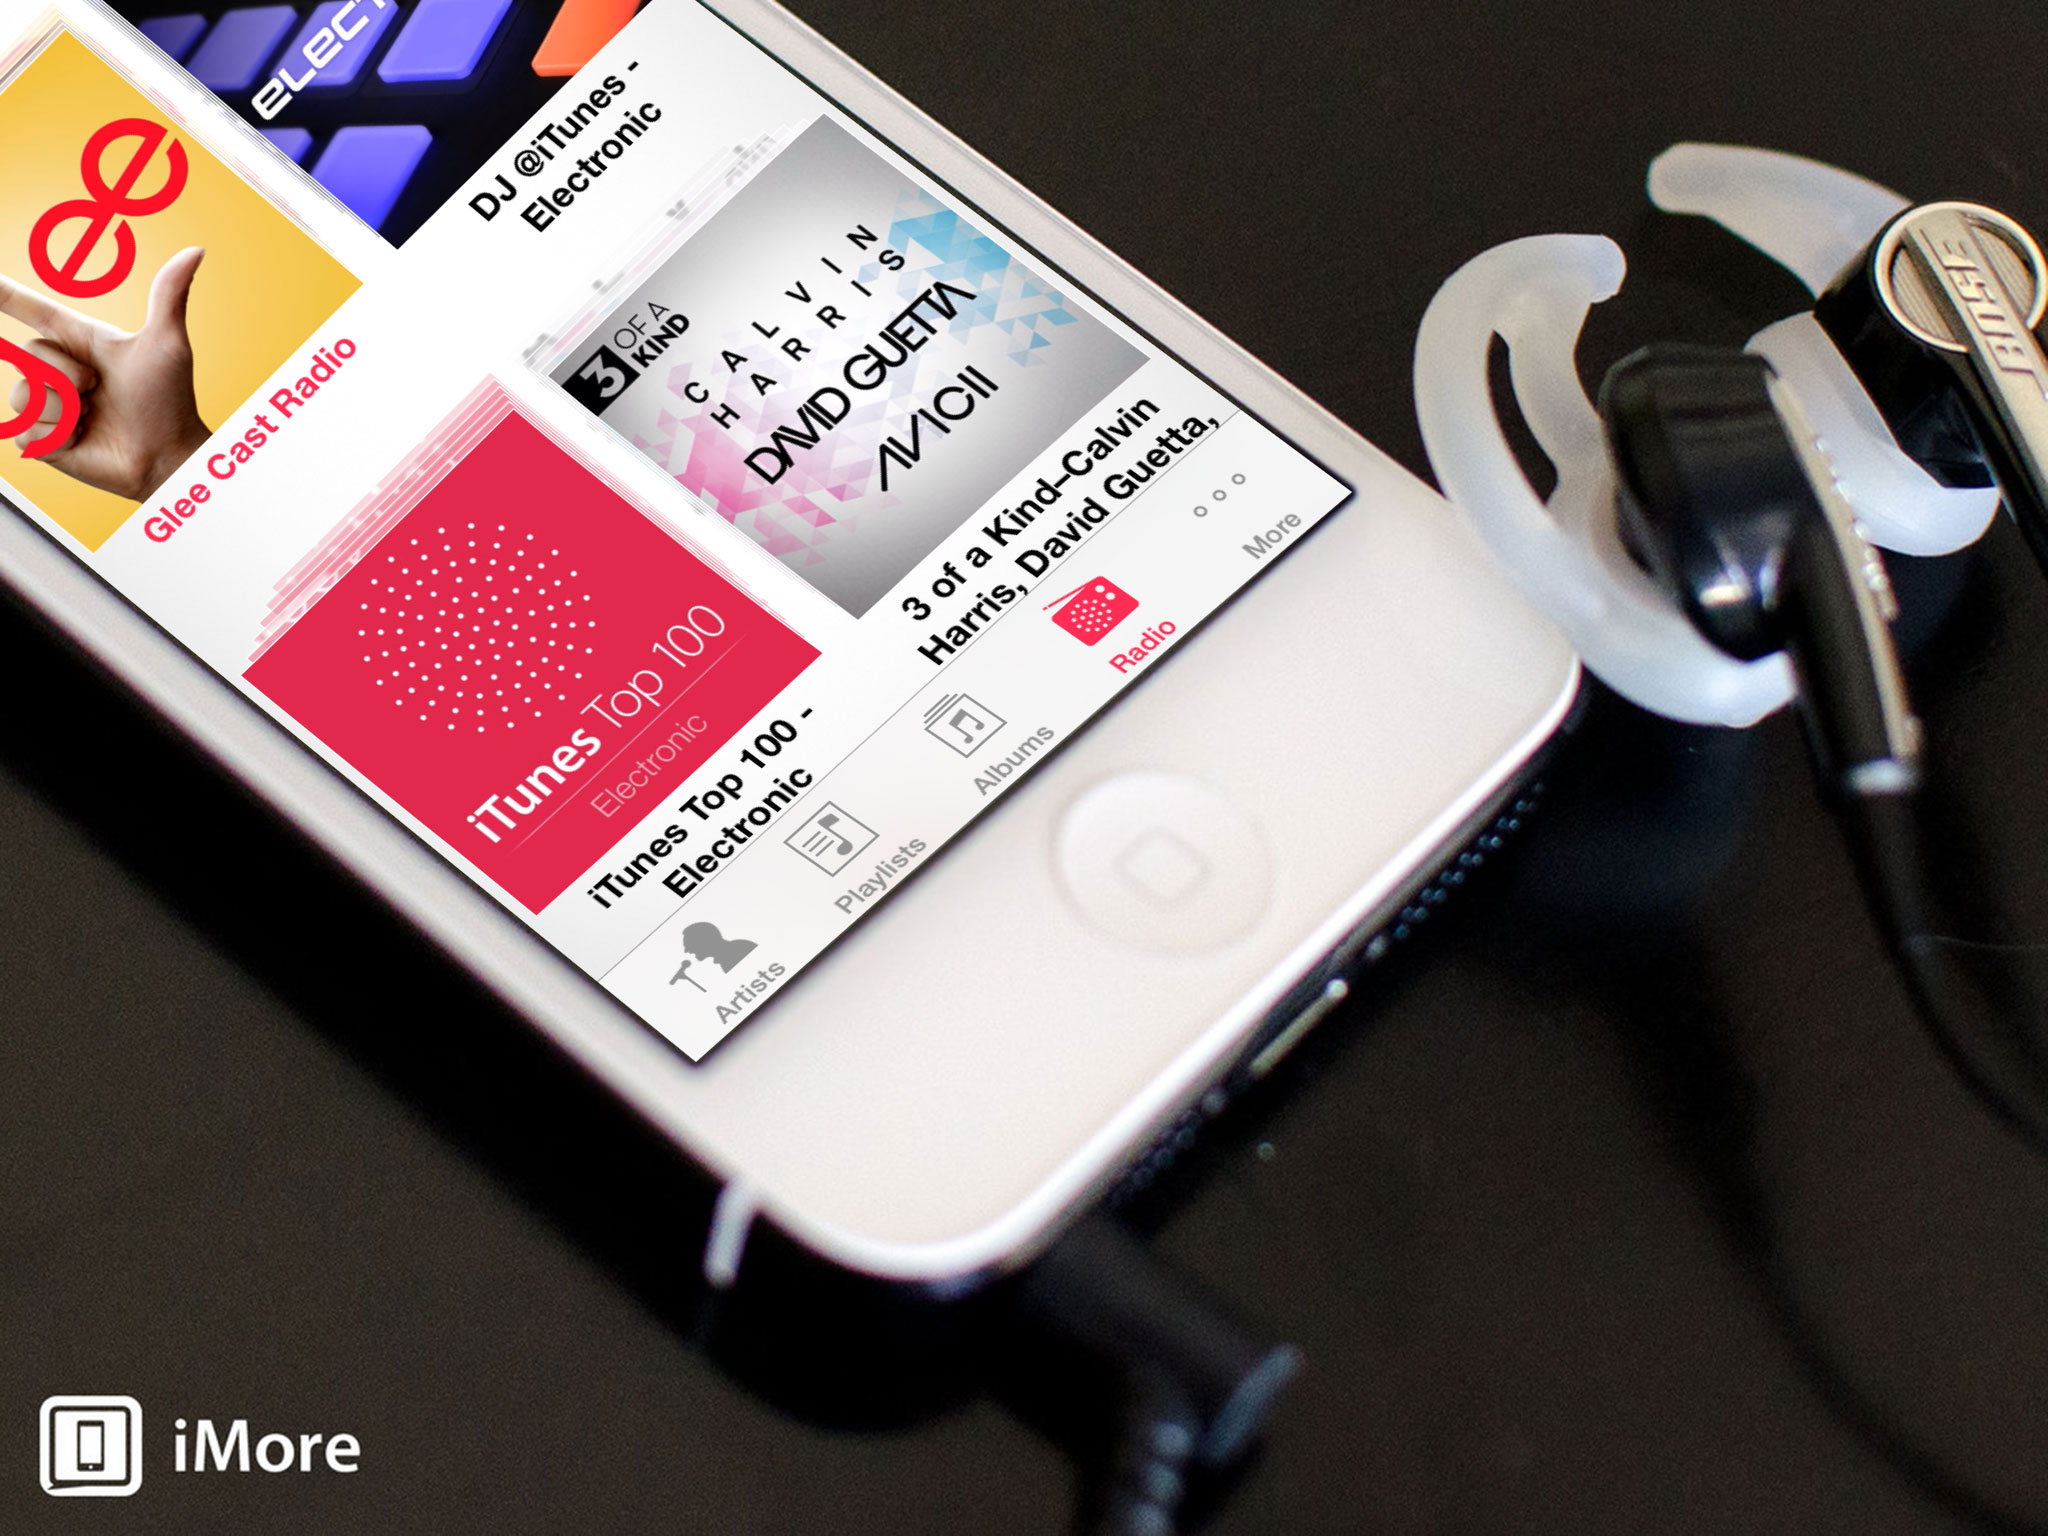 Giving iTunes Radio a second chance